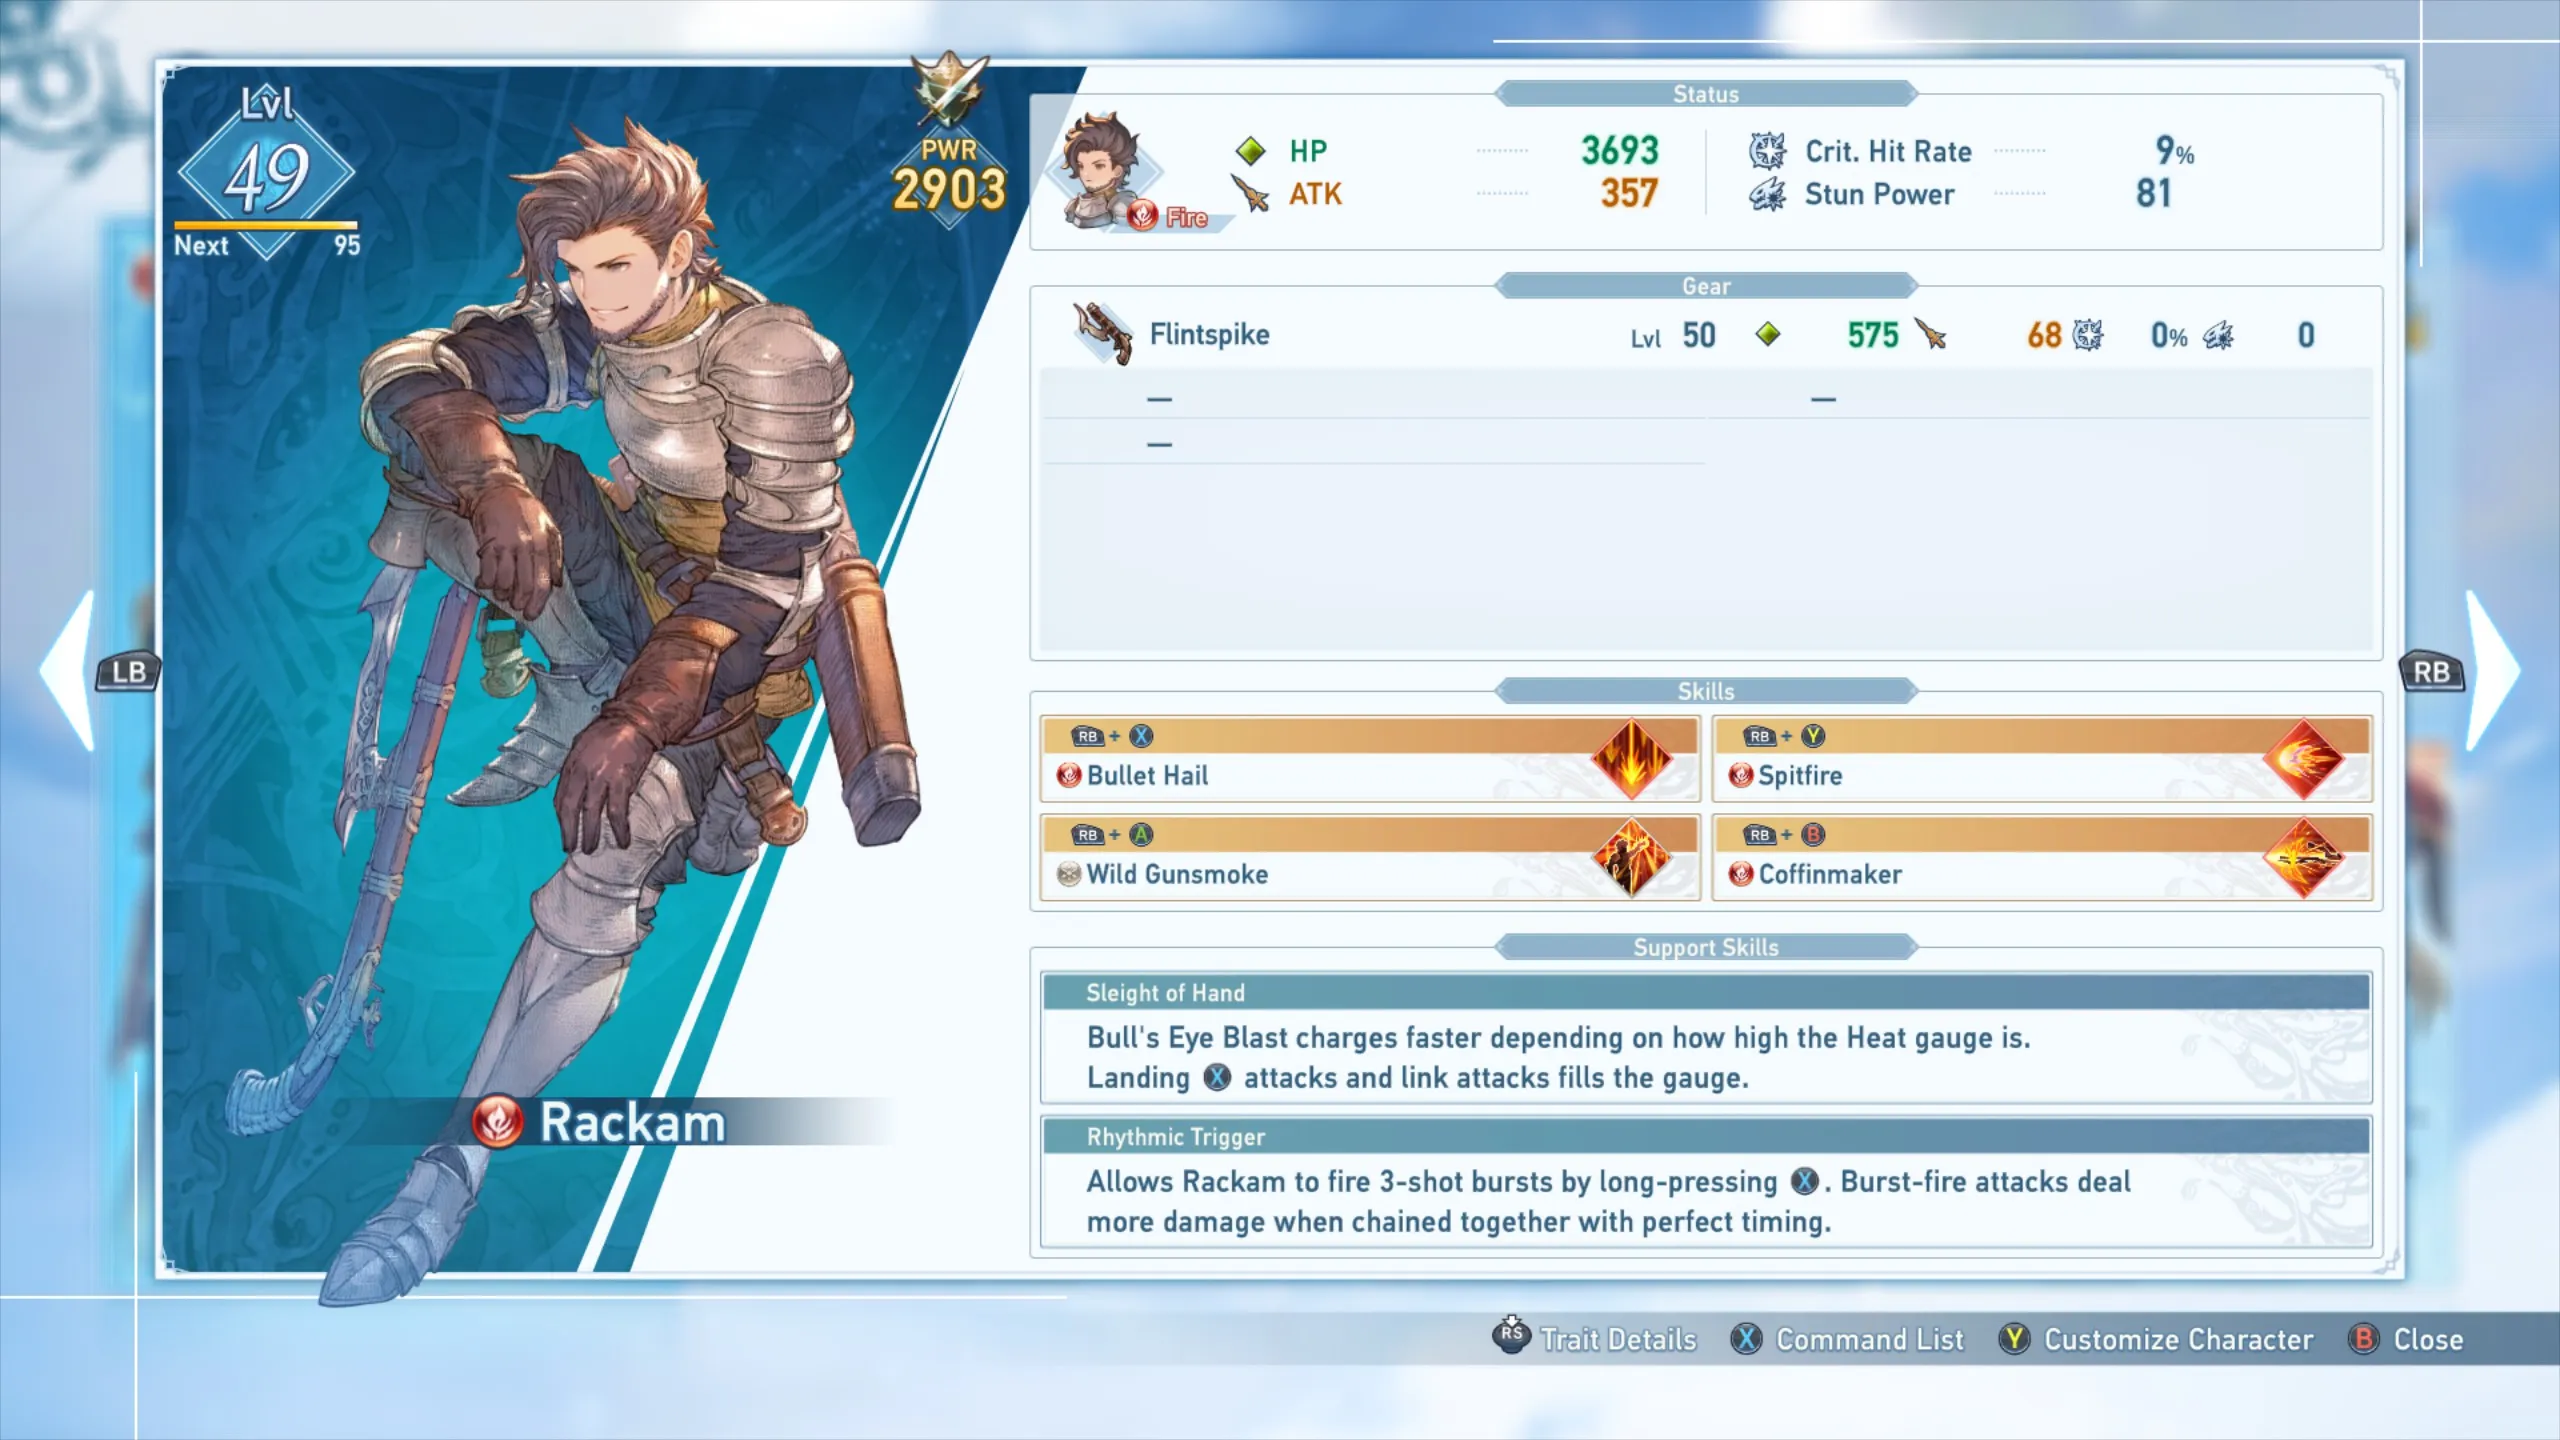 An image of Rackam's stats in Granblue Fantasy Relink.